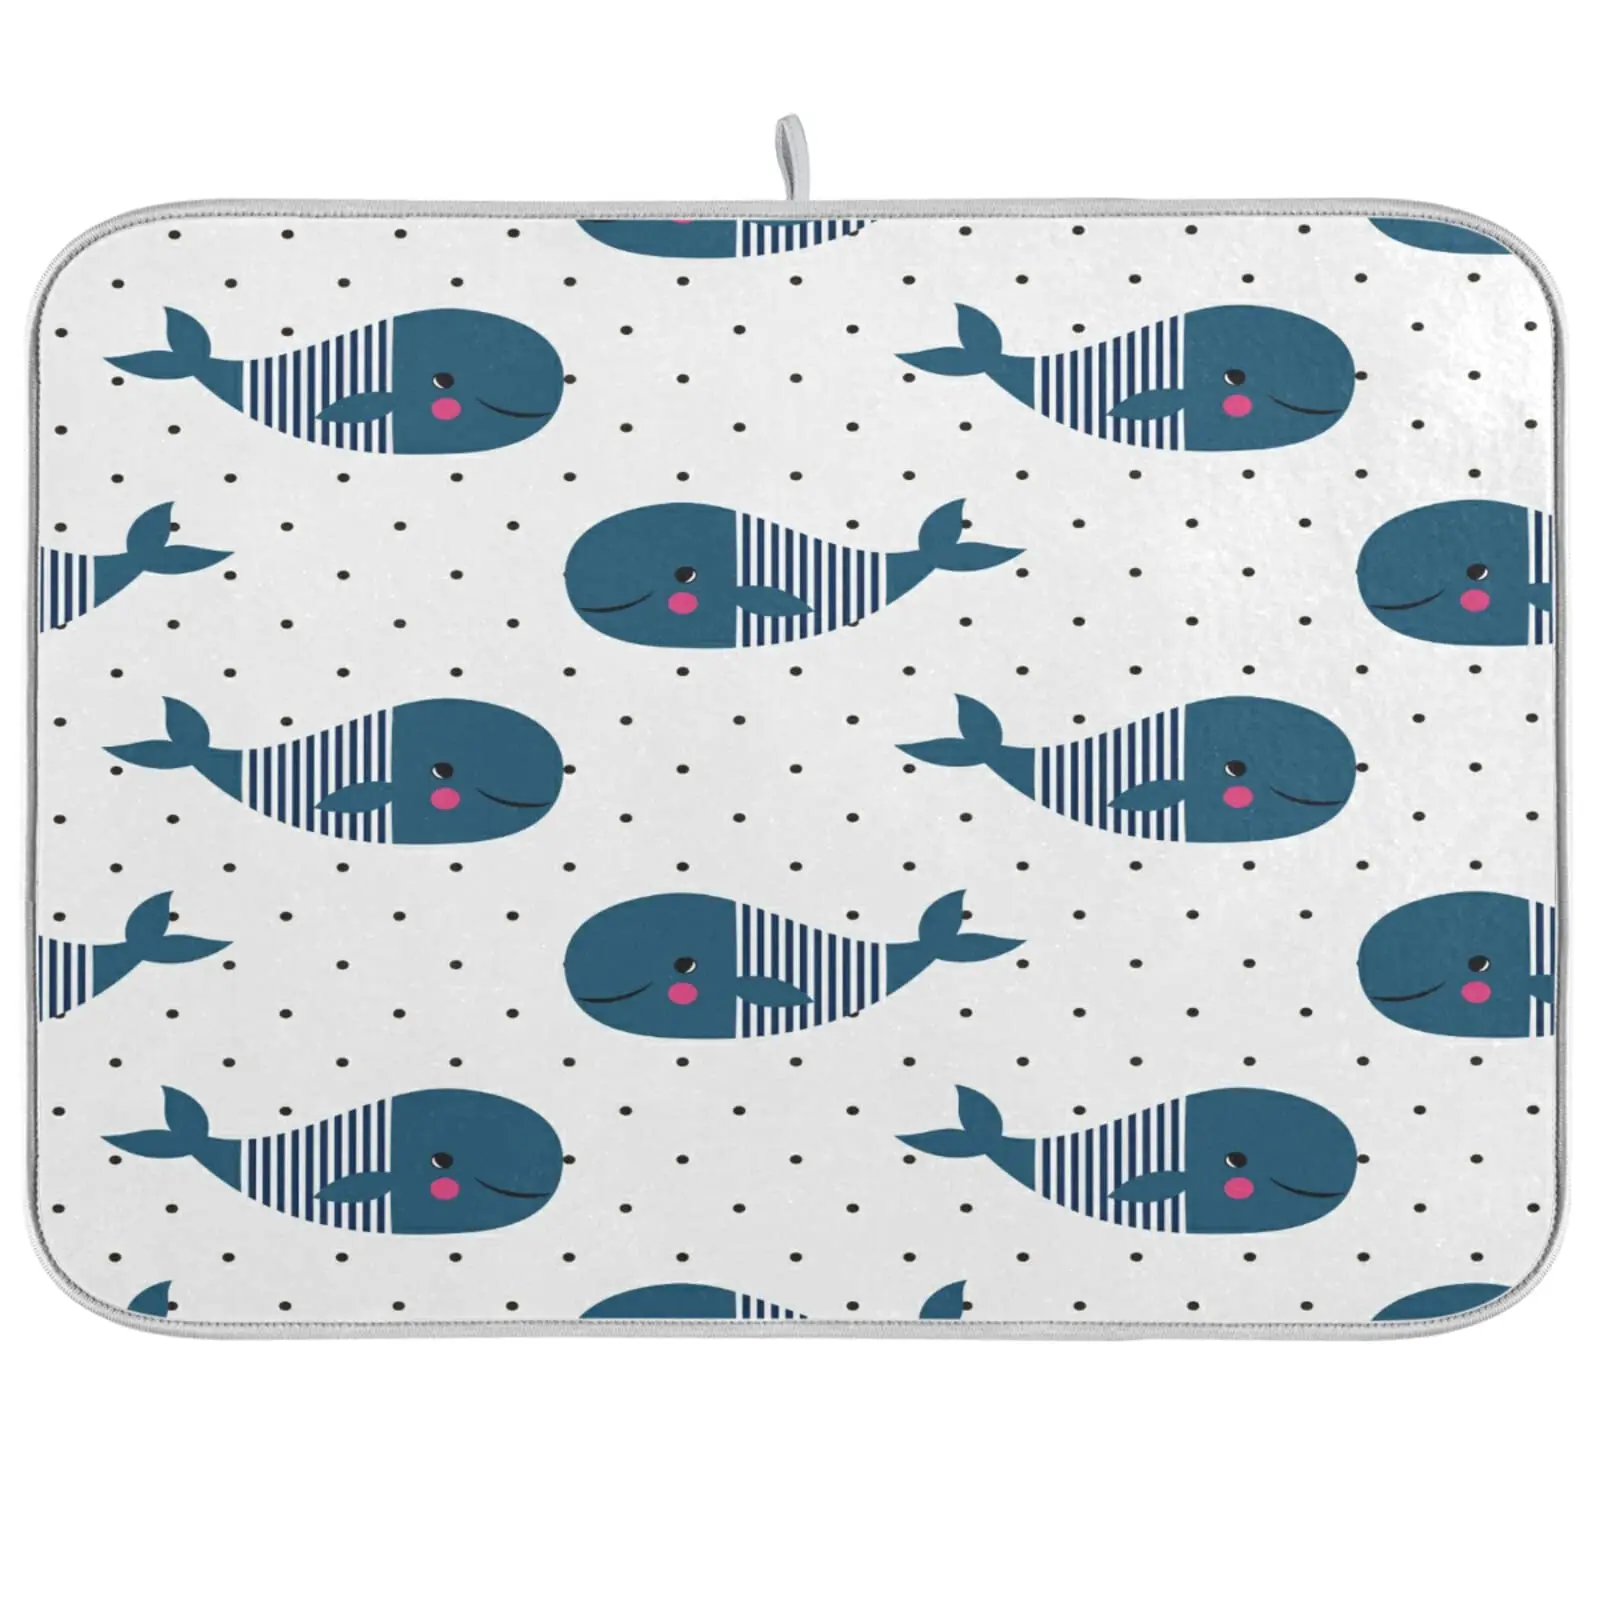 

Farmhouse Dish Drying Mats for Kitchen Counter Cute Cartoon Blue Whale Countertop Mat,16x18 Inches,Super Absorbent